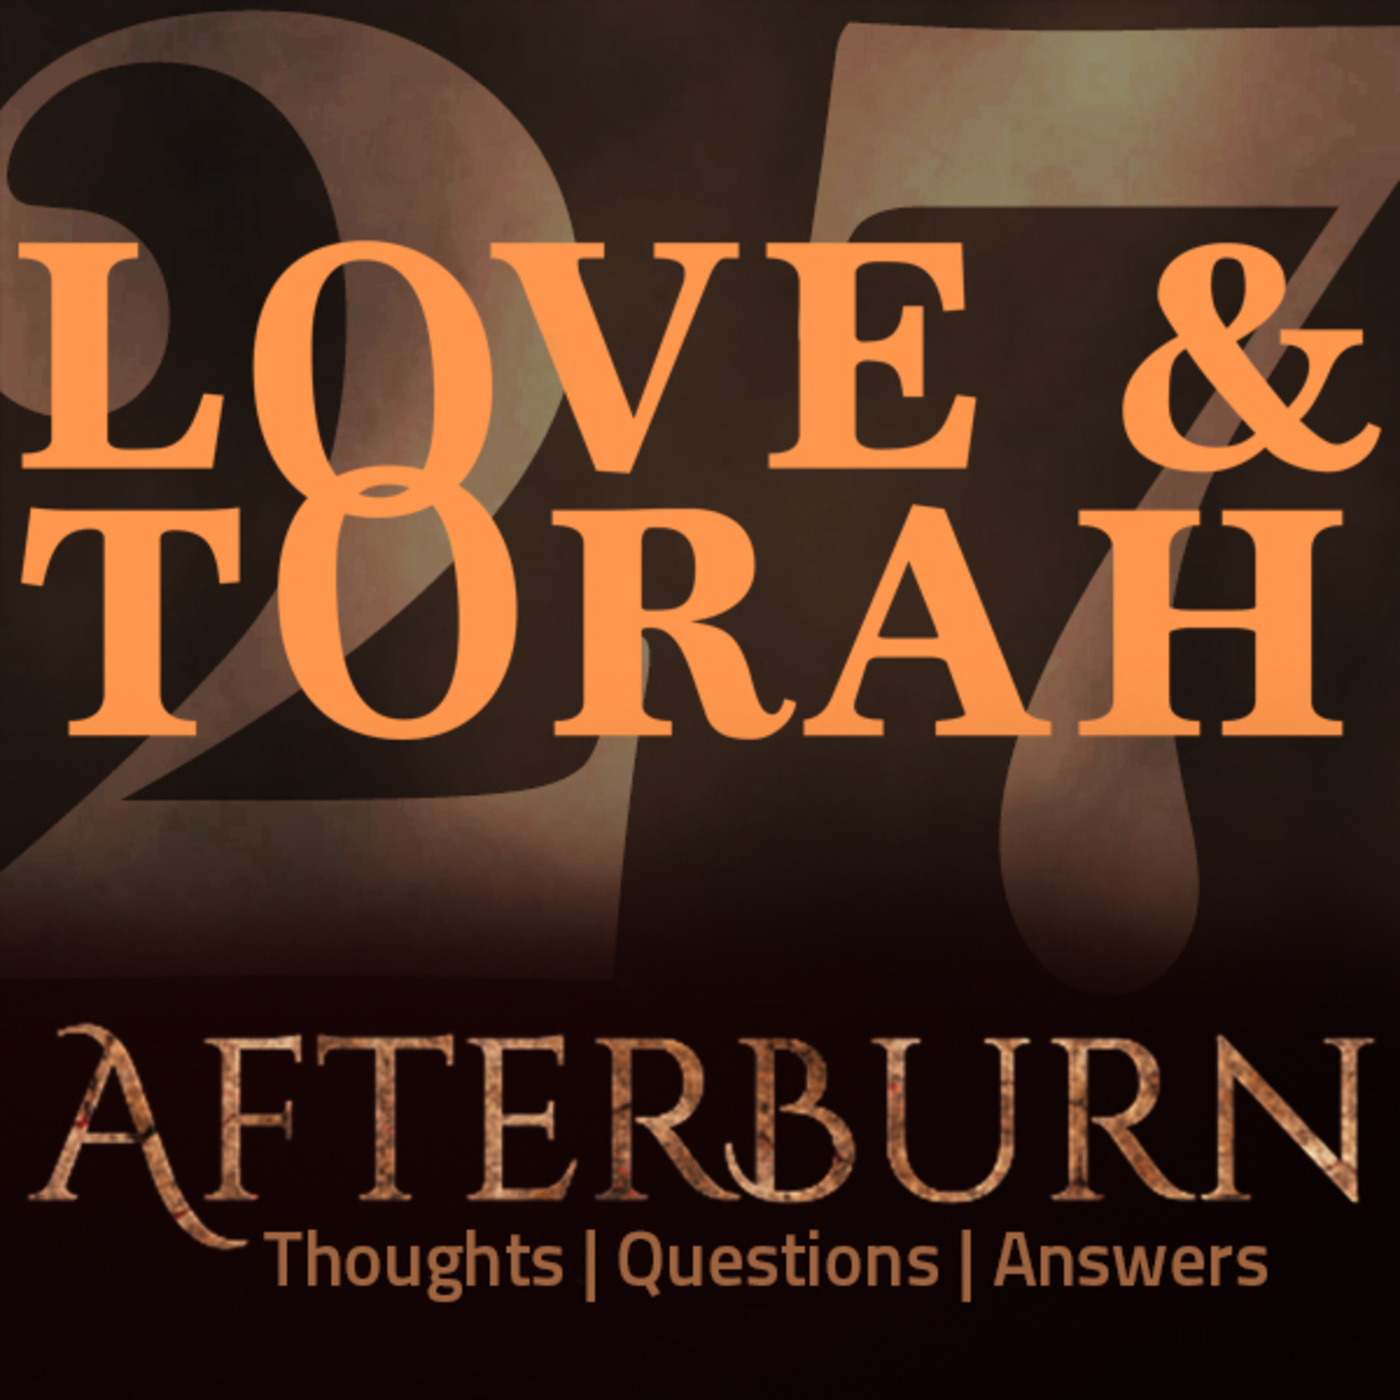 Episode 613: Afterburn | Thoughts, Q&A on Love and Torah | Part 27